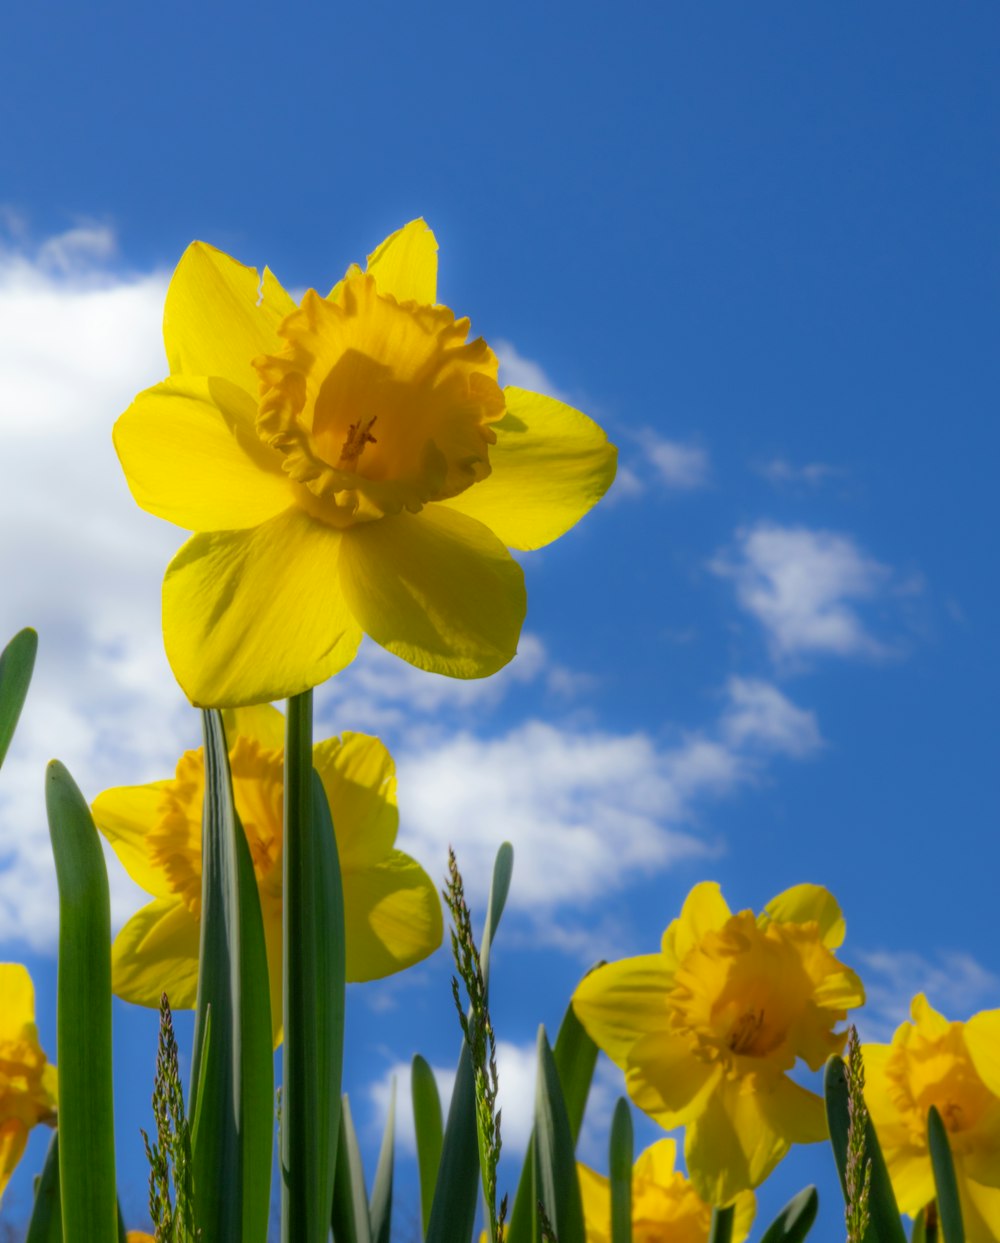 a field of yellow daffodils against a blue sky